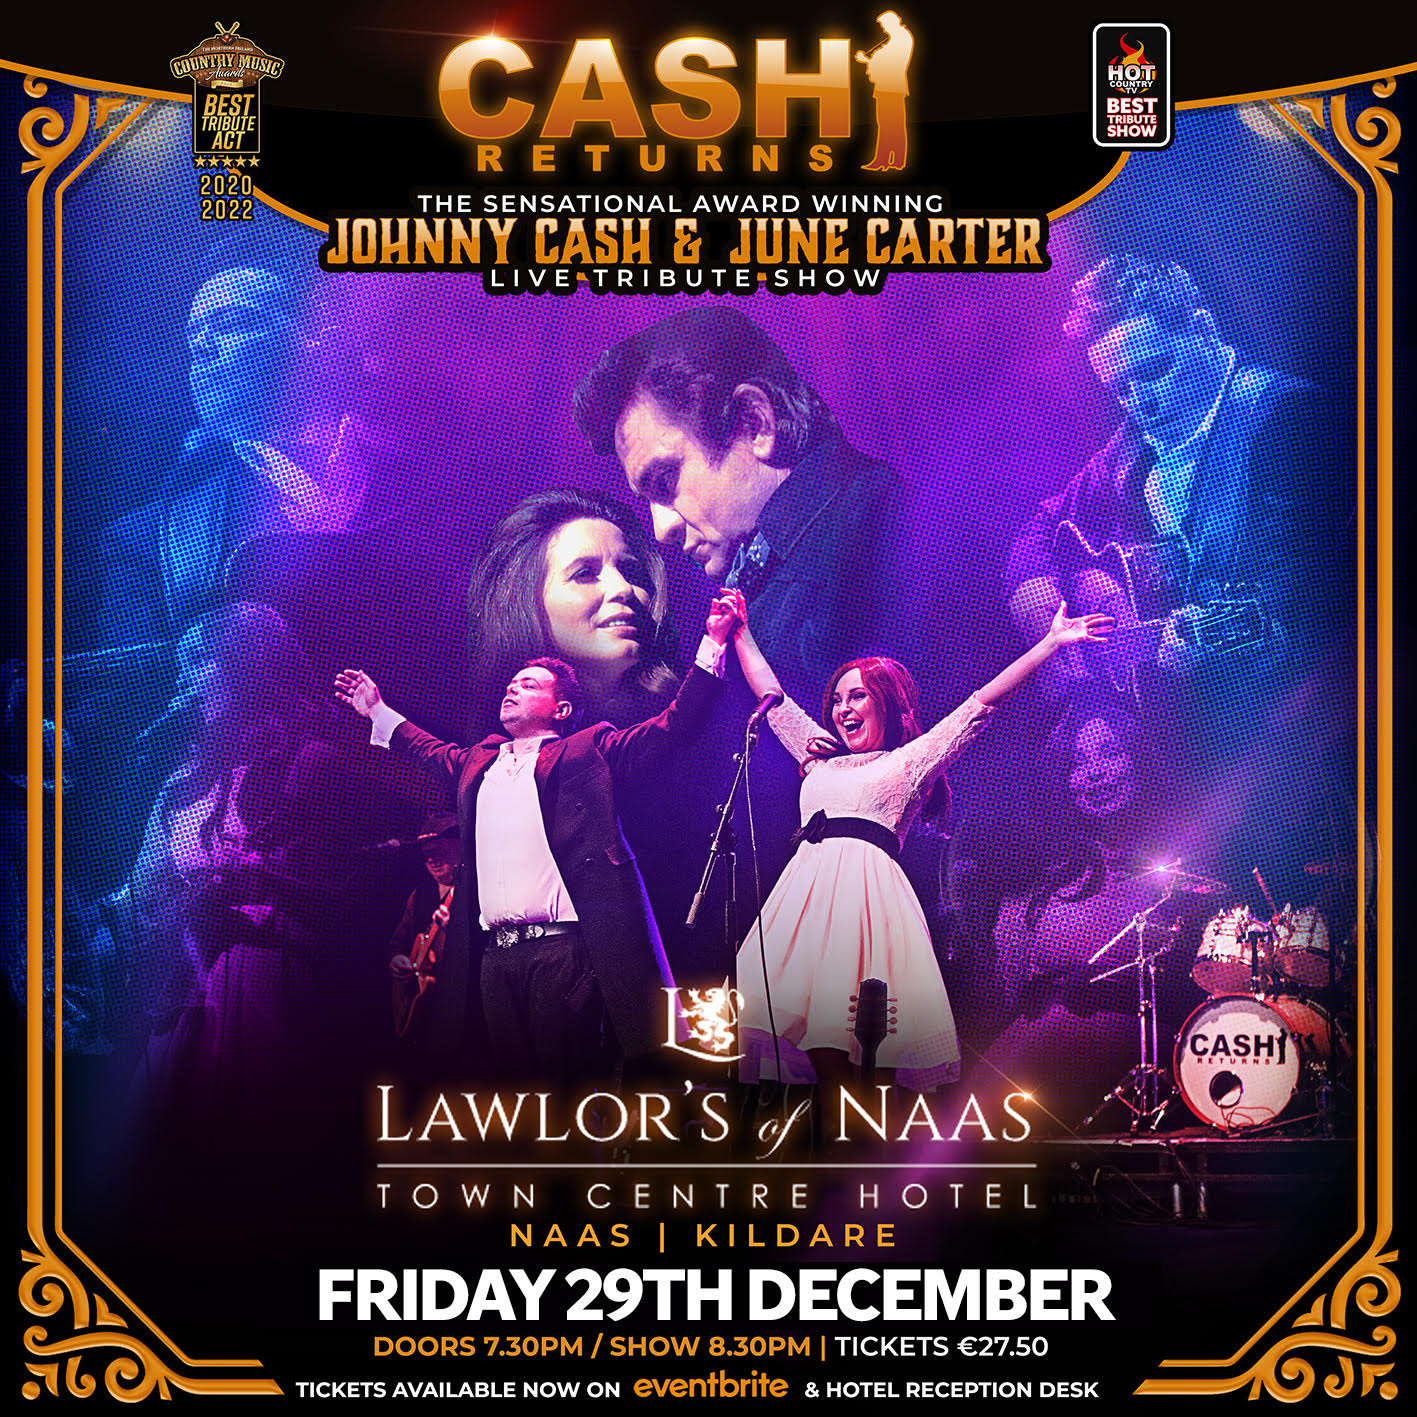 Cash Returns, the Johnny Cash & June Carter Tribute Show Lawlors of Naas